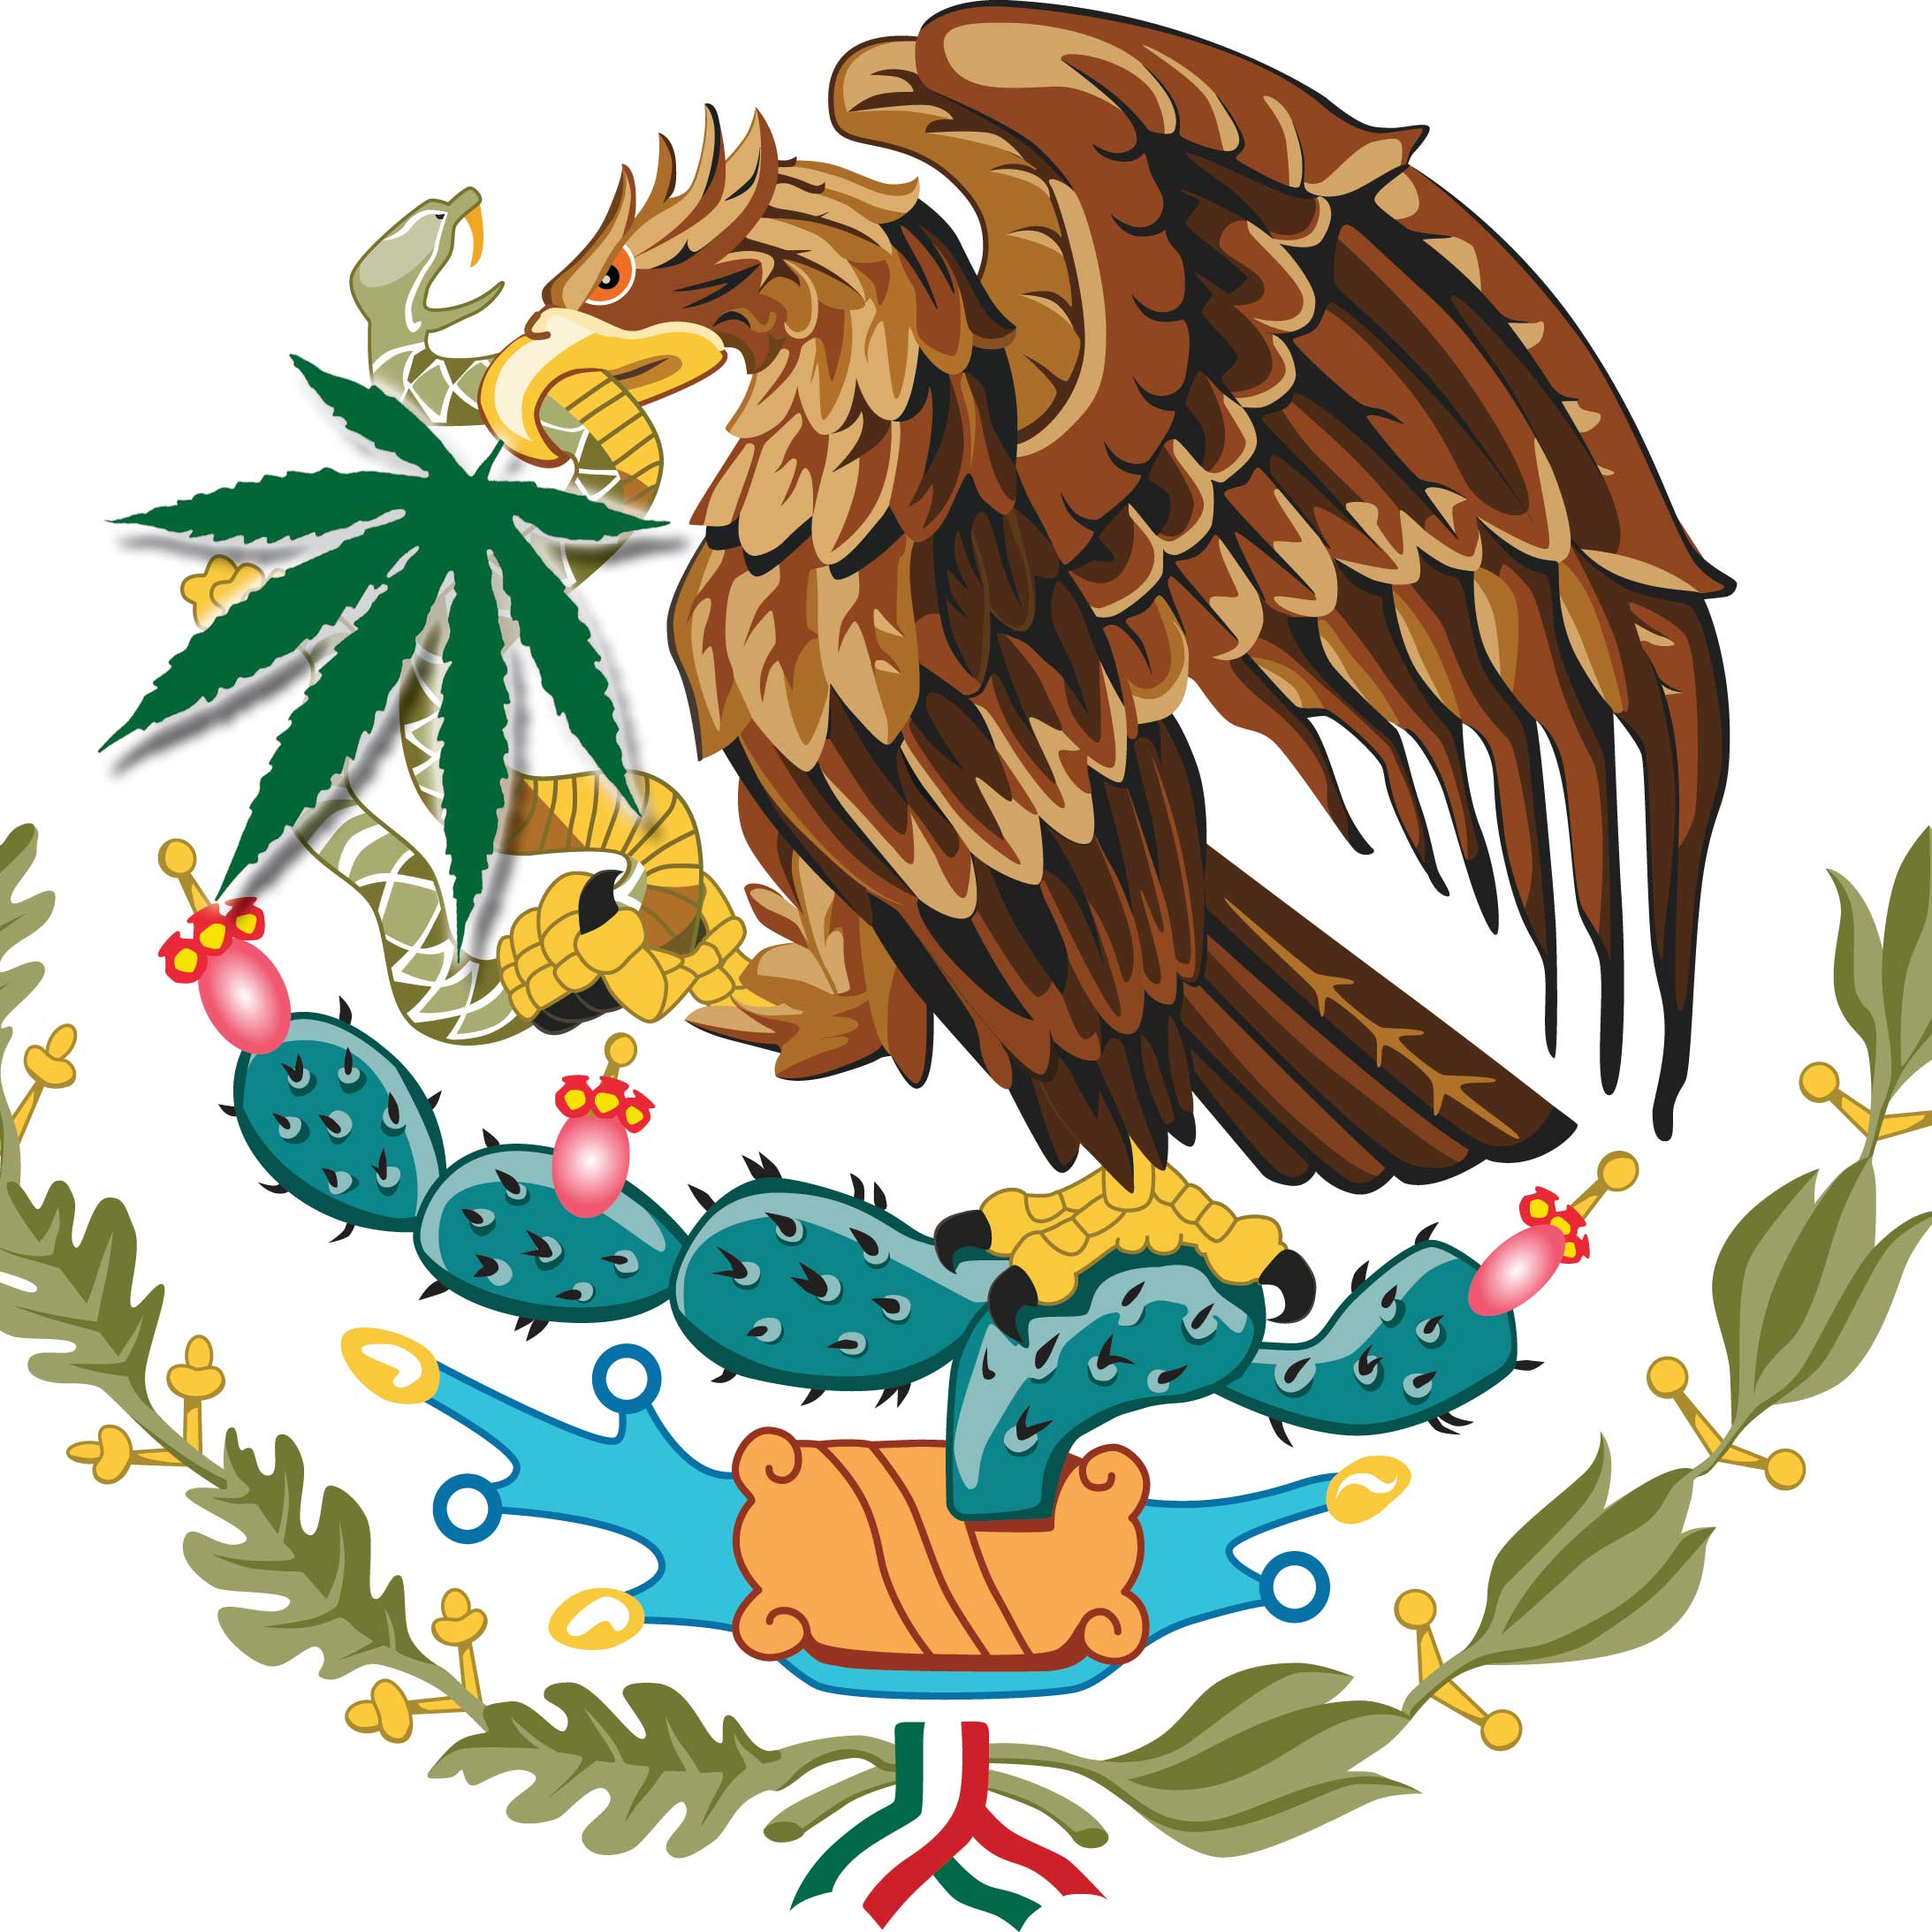 The possession and use of marijuana is now legal throughout Mexico. 